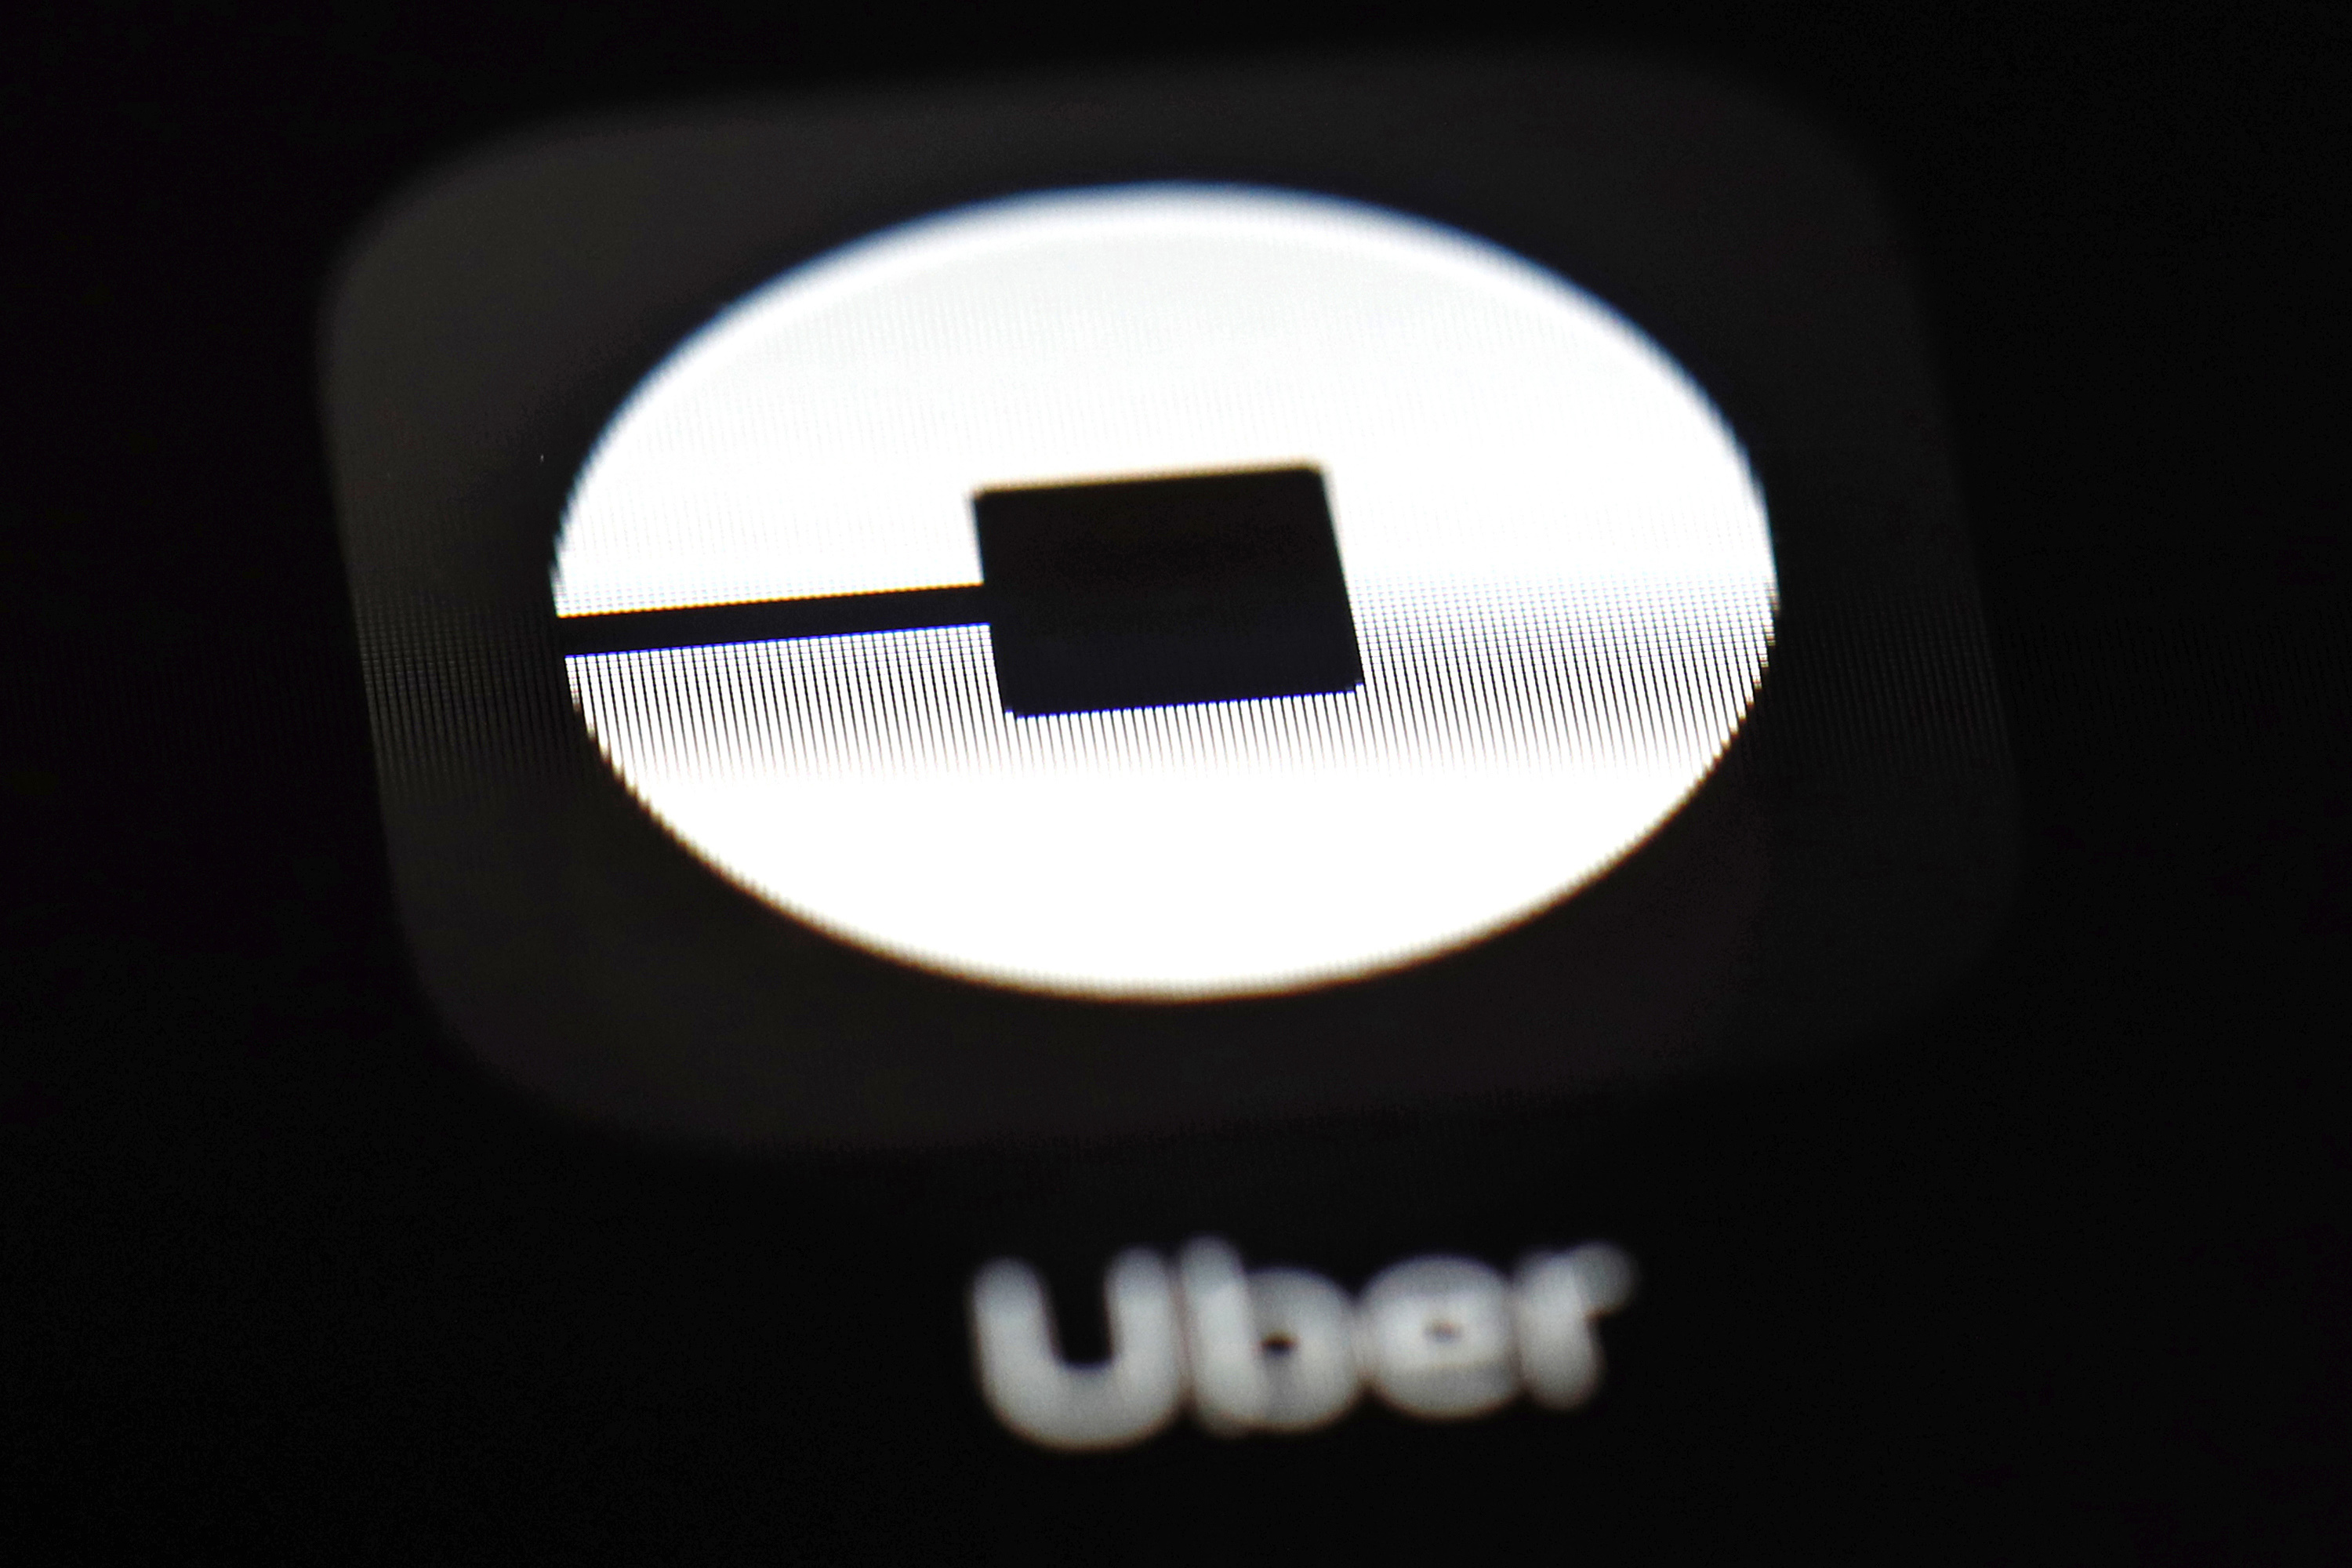 Uber shifts into lower gear, prices IPO at $45